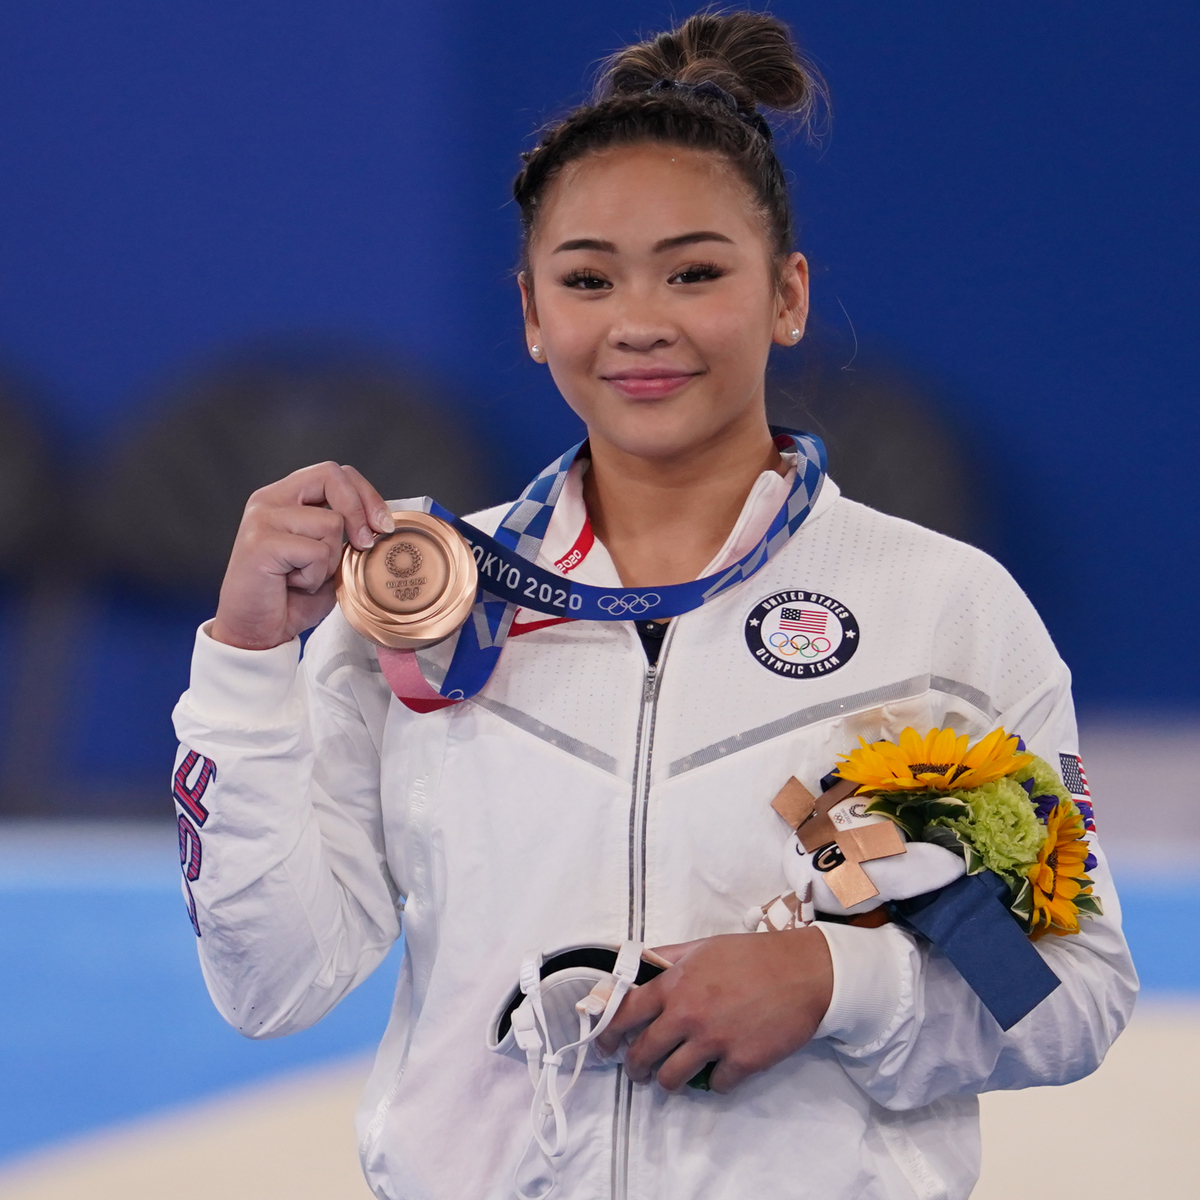 Sunisa Lee Goes Off to College After Historic Tokyo Olympics Wins